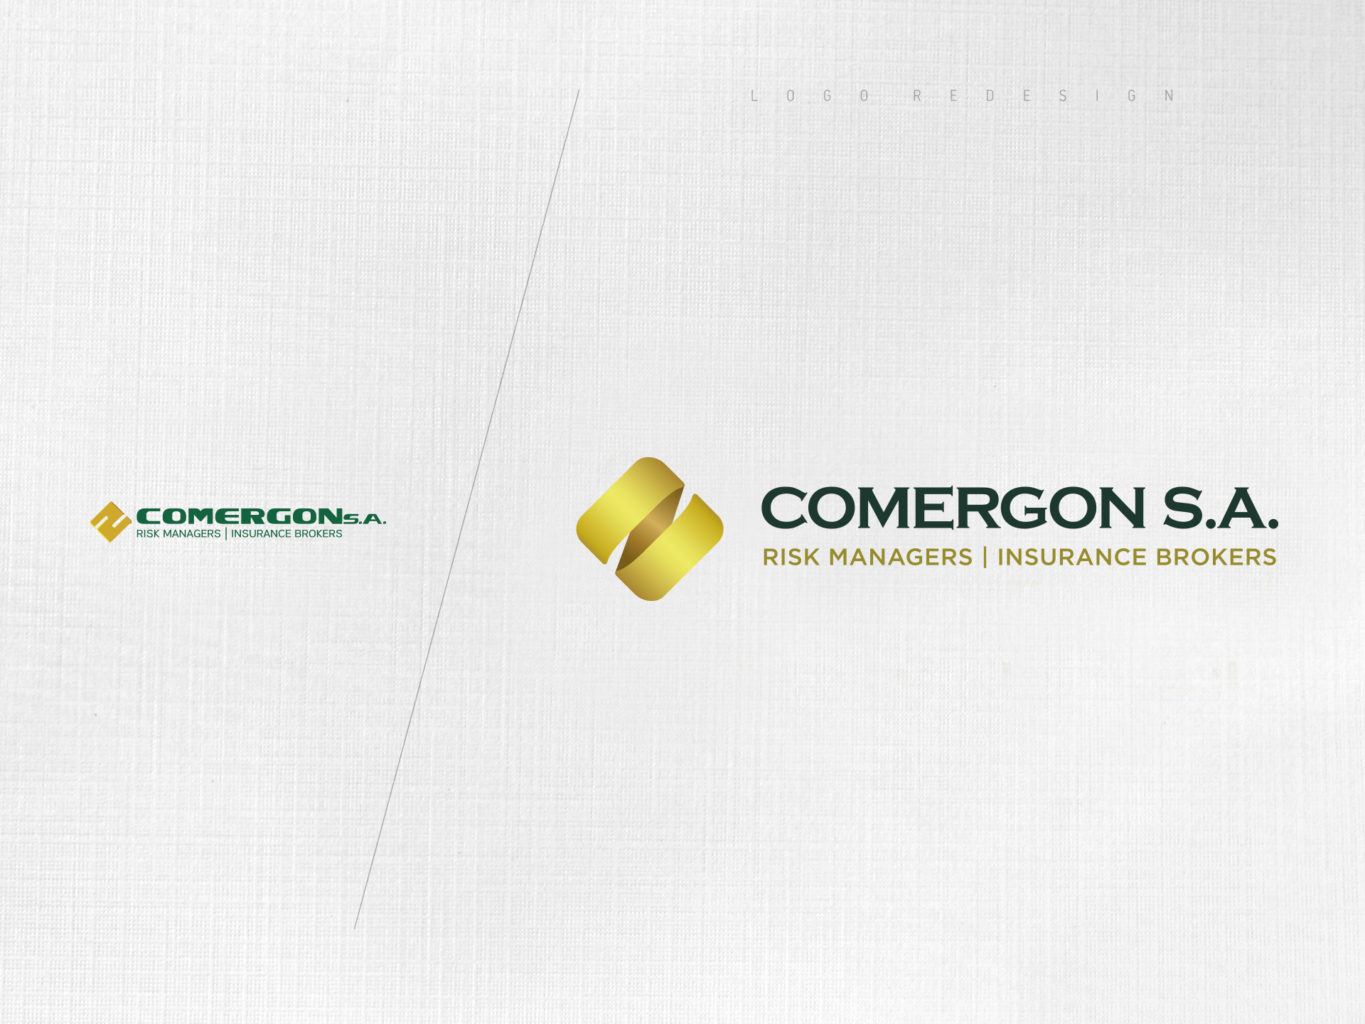 Comergon Risk Managers logo redesign by fiftyeggz